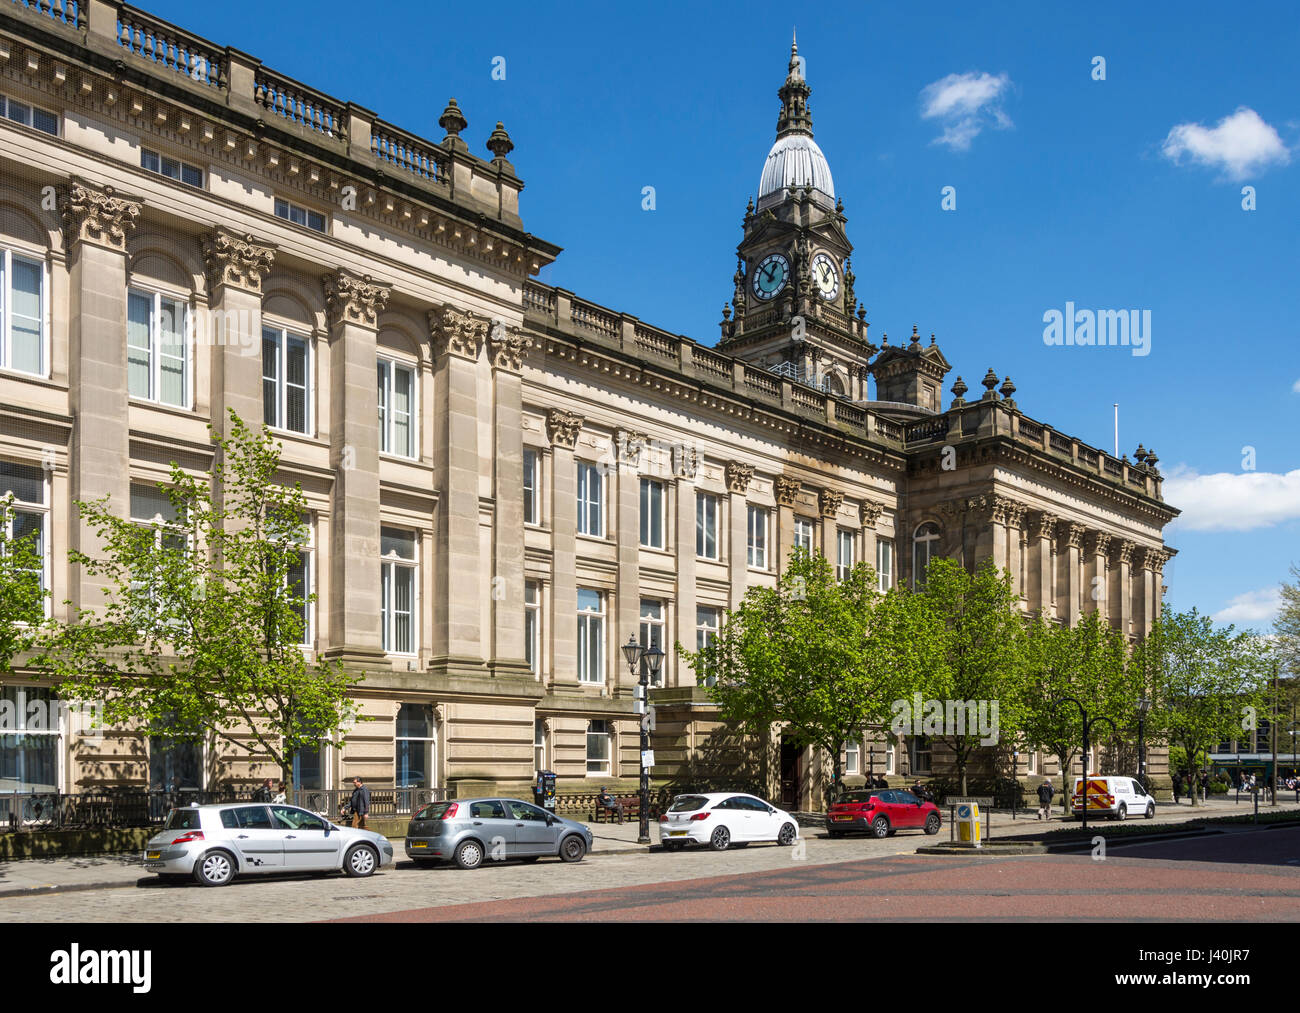 The Town Hall and clock tower, Bolton, Greater Manchester, England, UK Stock Photo